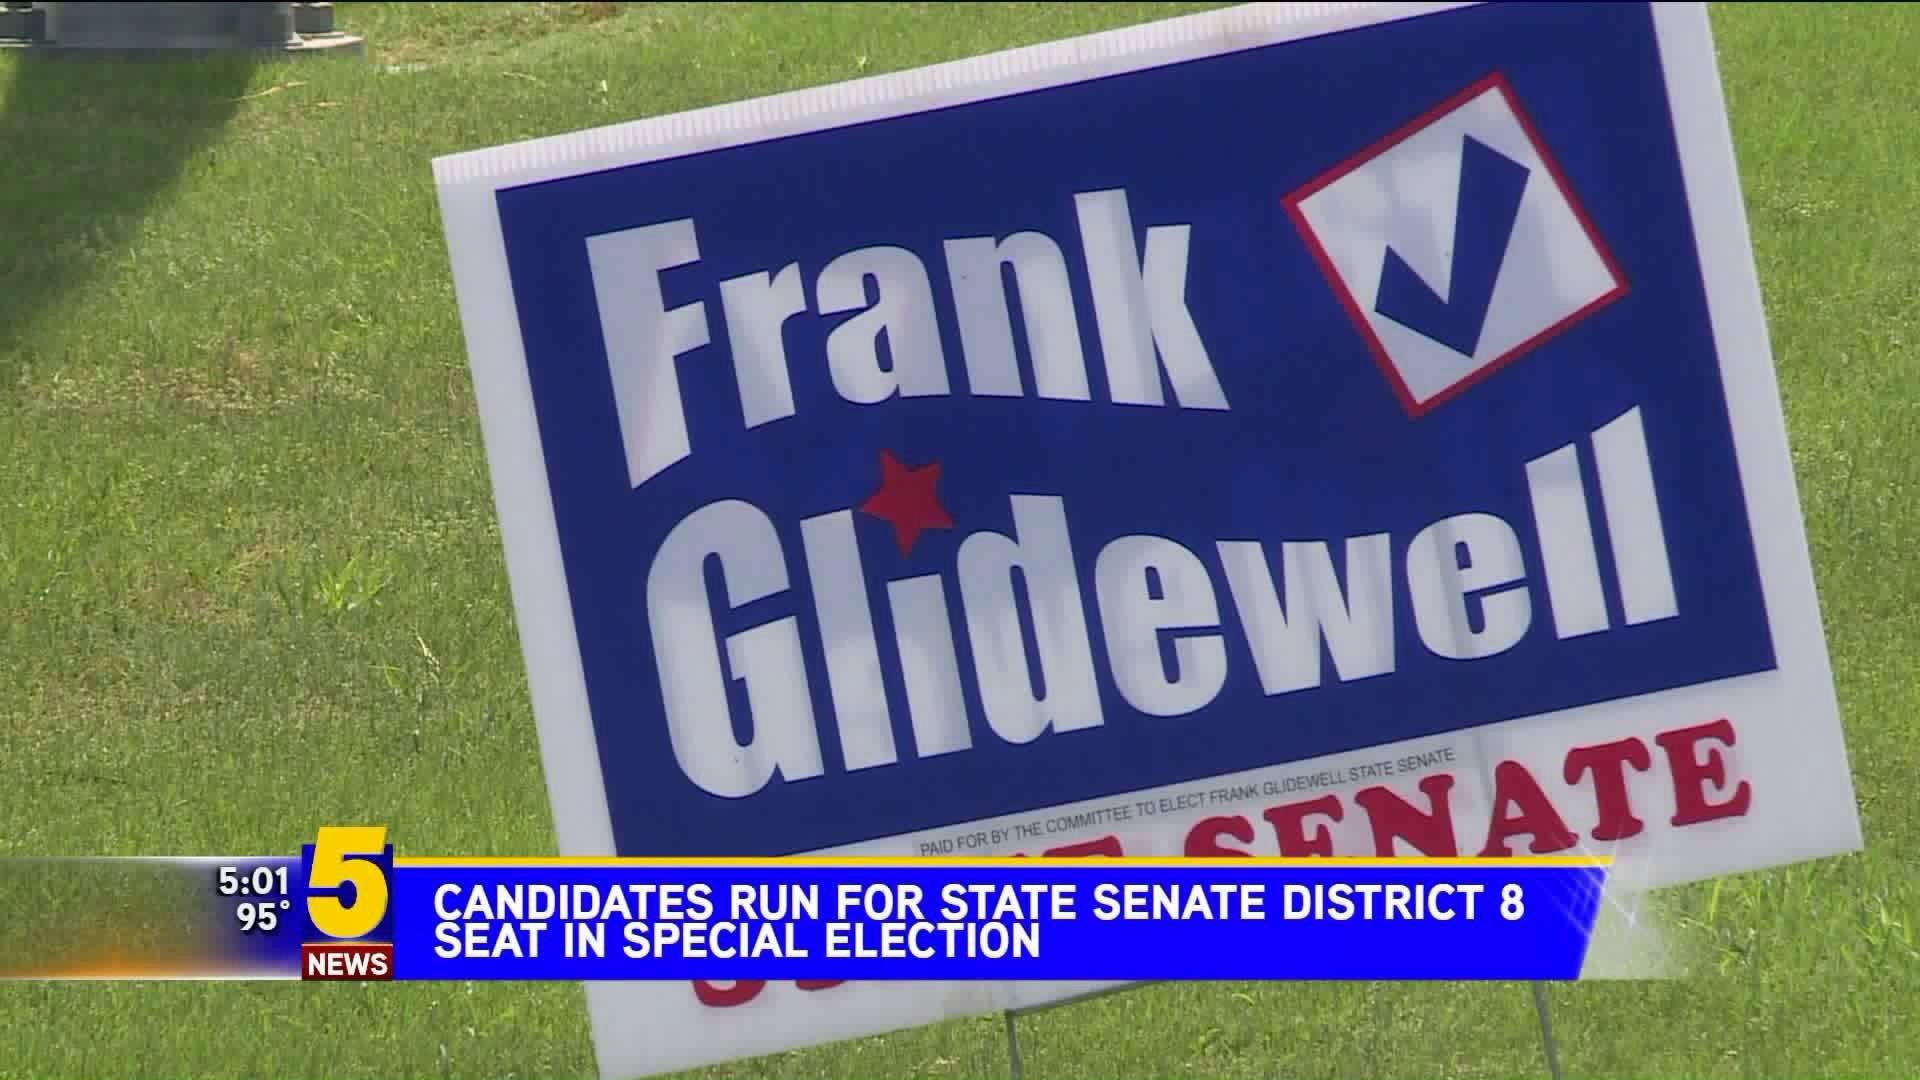 Candidates Run For State Senate District 8 Seat In Special Election